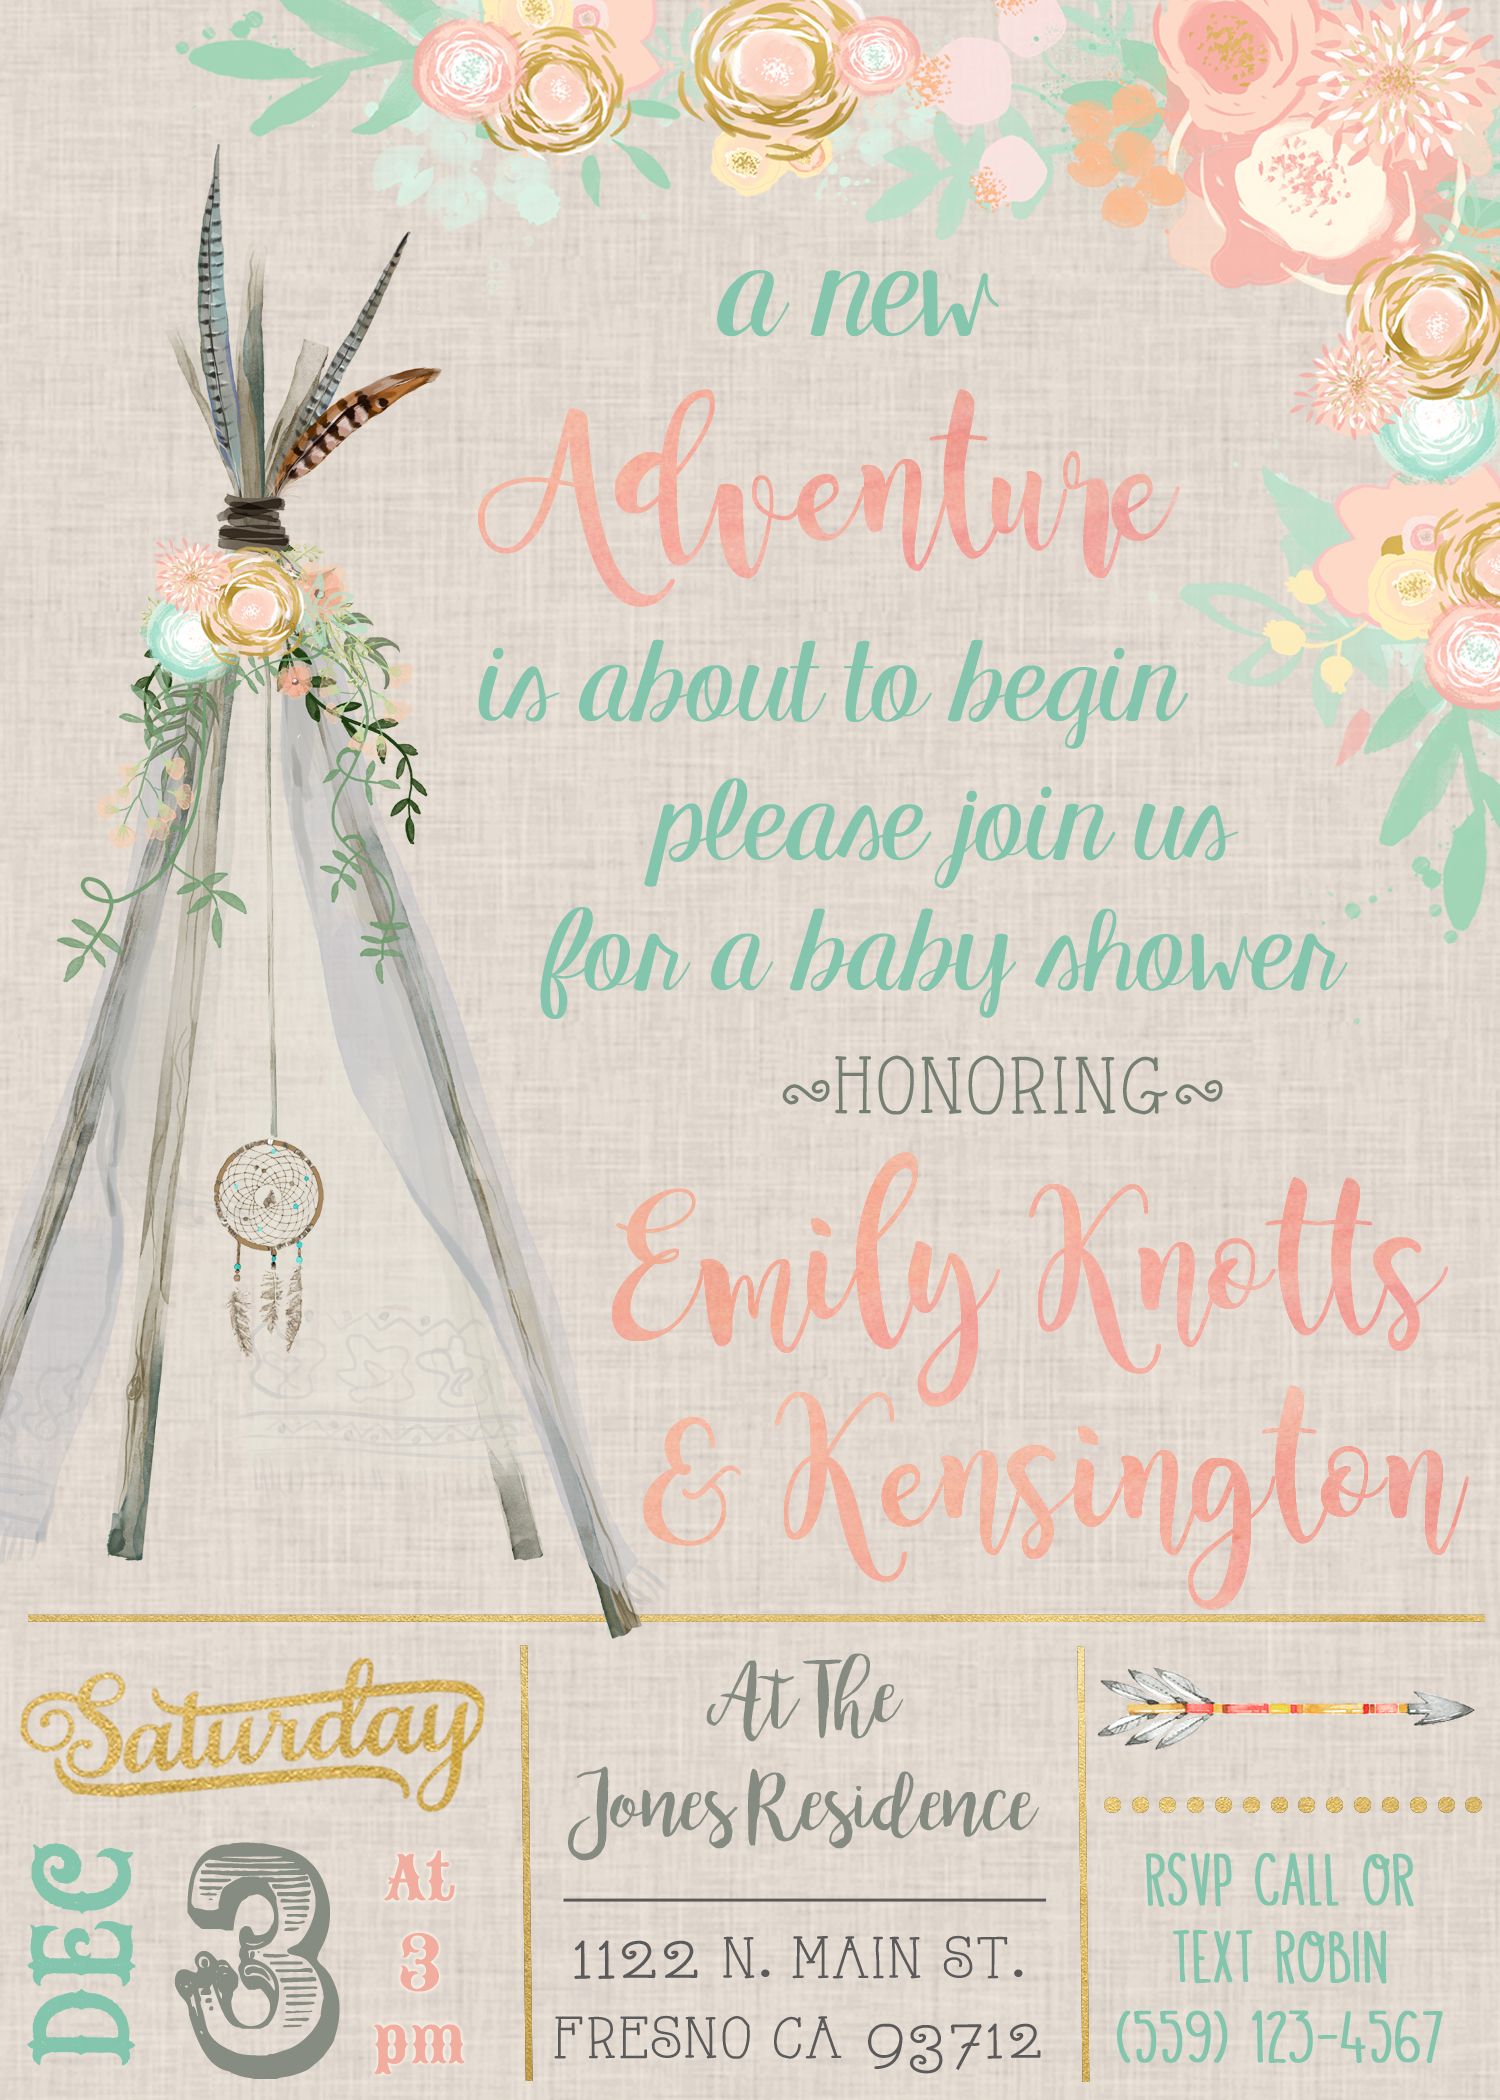 Full Size of Baby Shower:nautical Baby Shower Invitations For Boys Baby Girl Themes For Bedroom Baby Shower Ideas Baby Shower Decorations Themes For Baby Girl Nursery Baby Girl Themes For Bedroom Baby Shower Centerpiece Ideas For Boys Invitations Oriental Trading Baby Shower